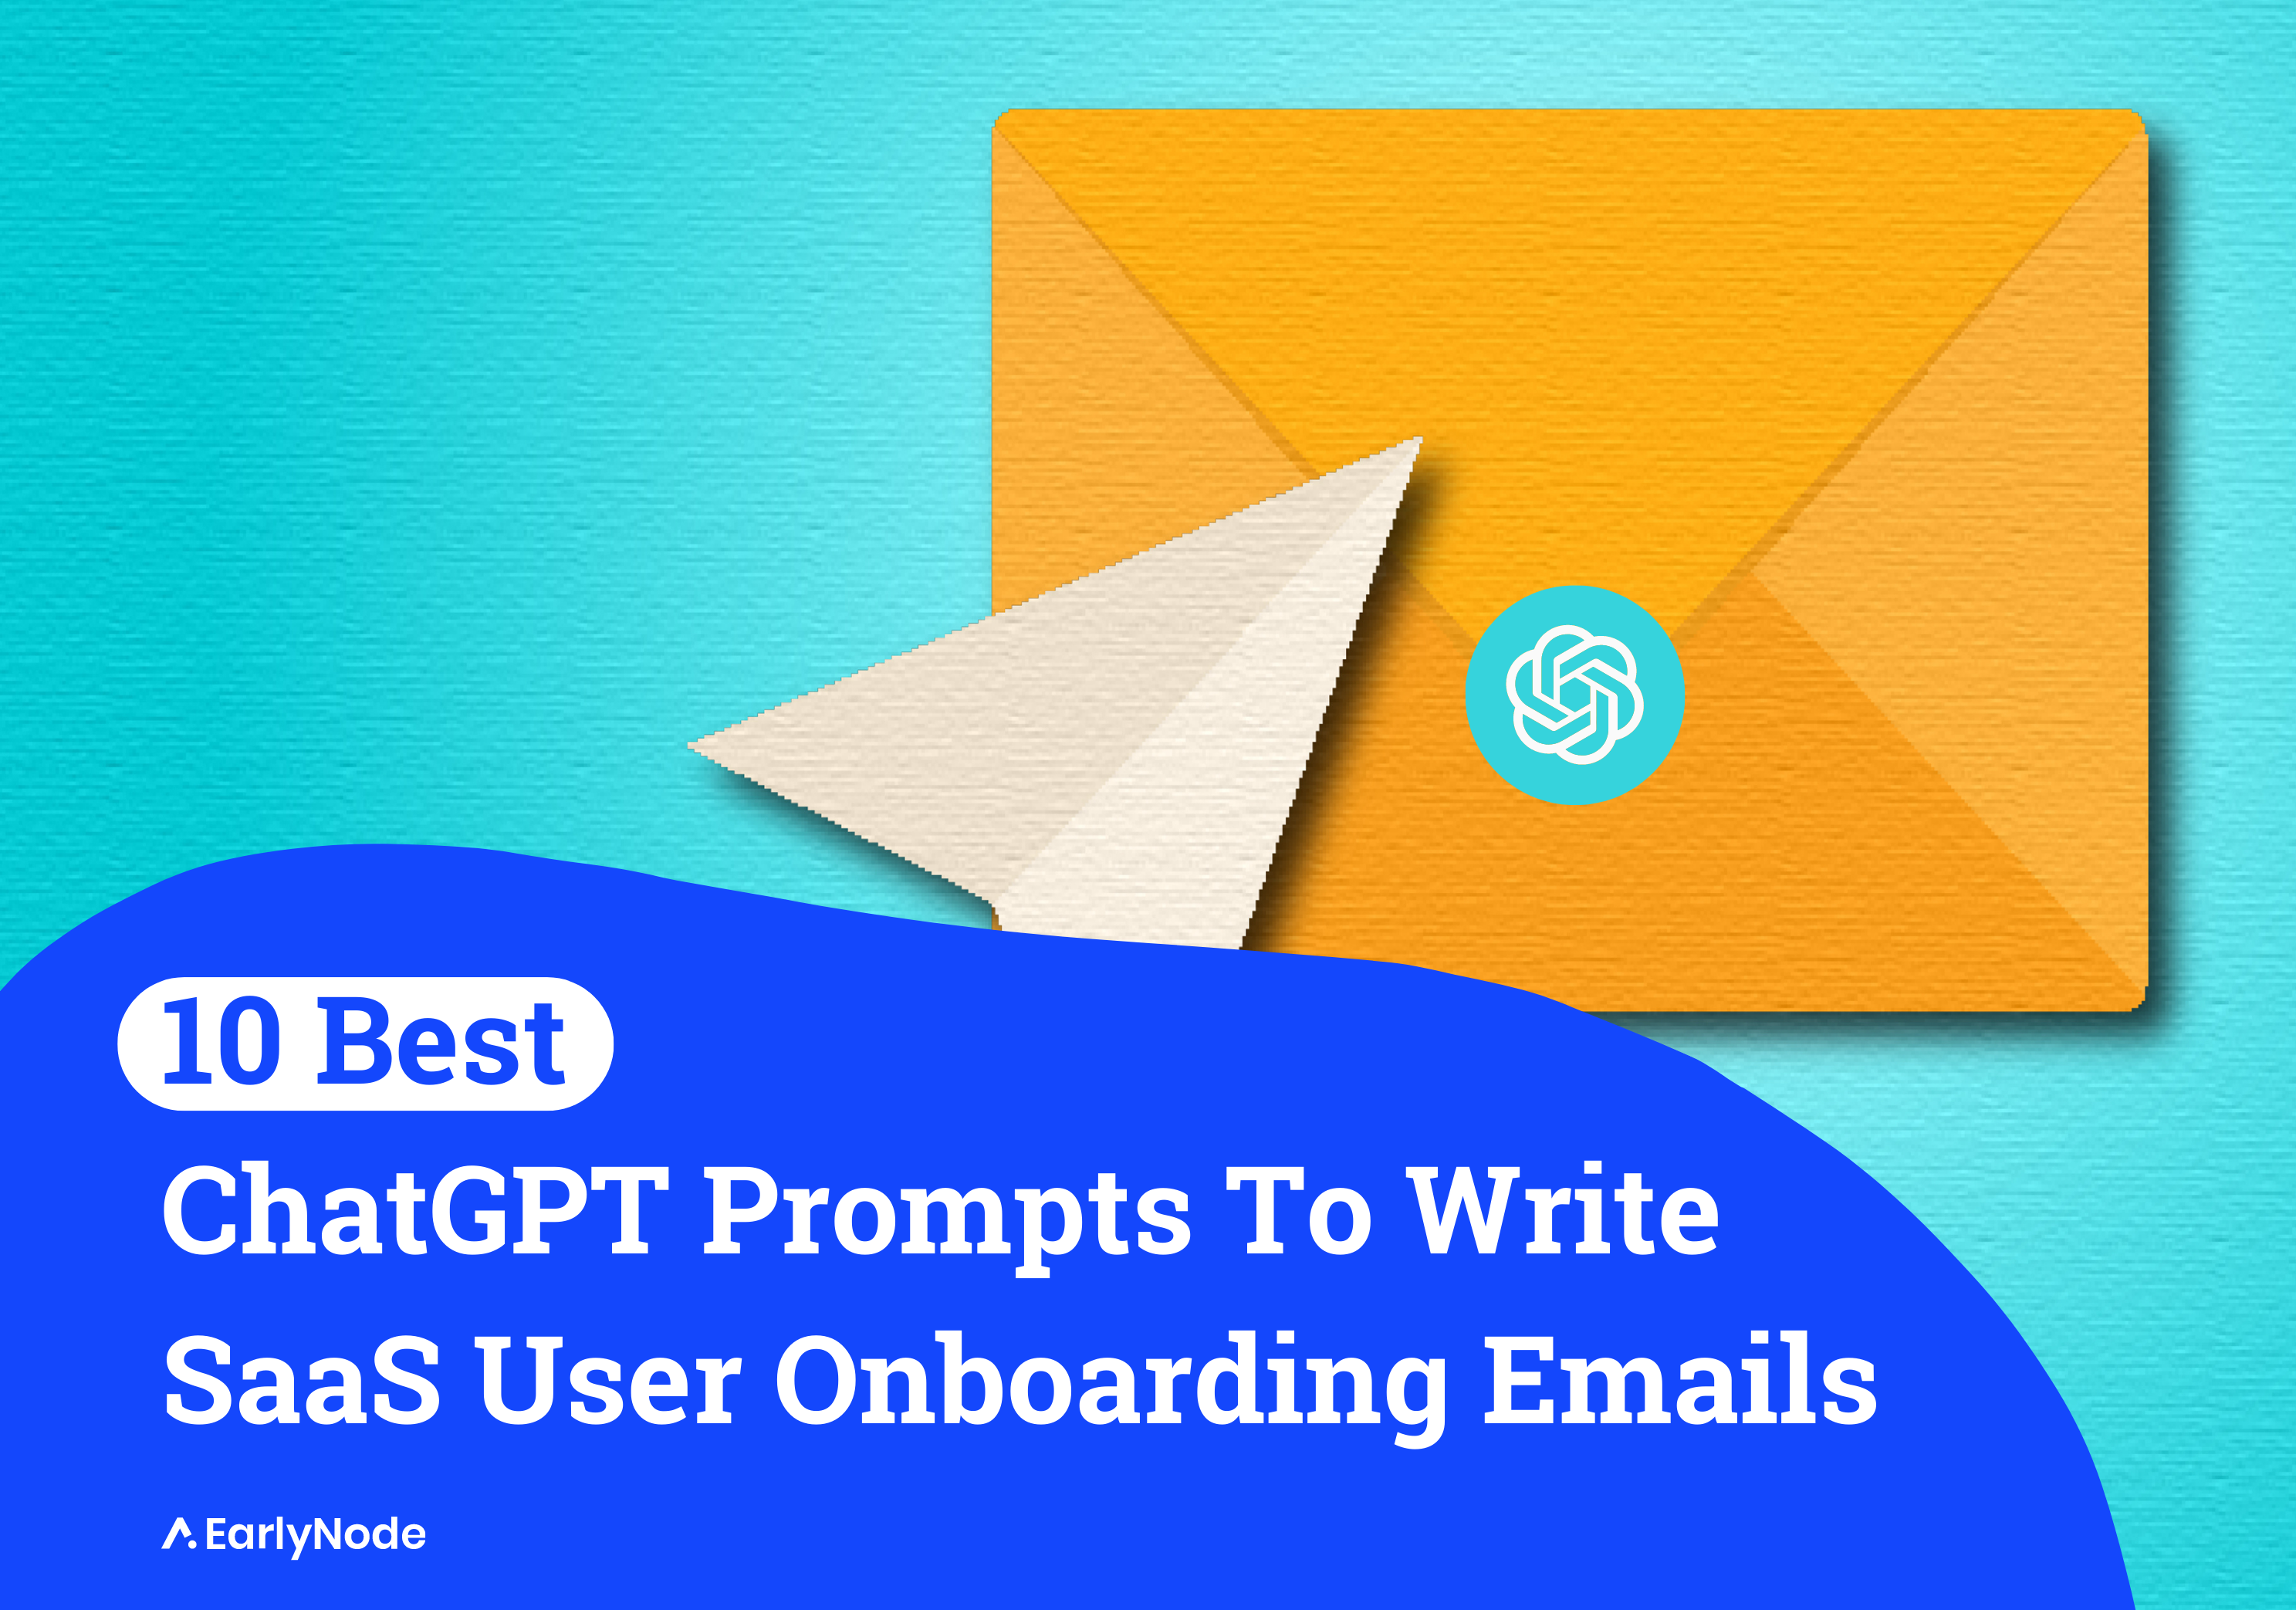 10 ChatGPT Prompts To Write SaaS User Onboarding Emails